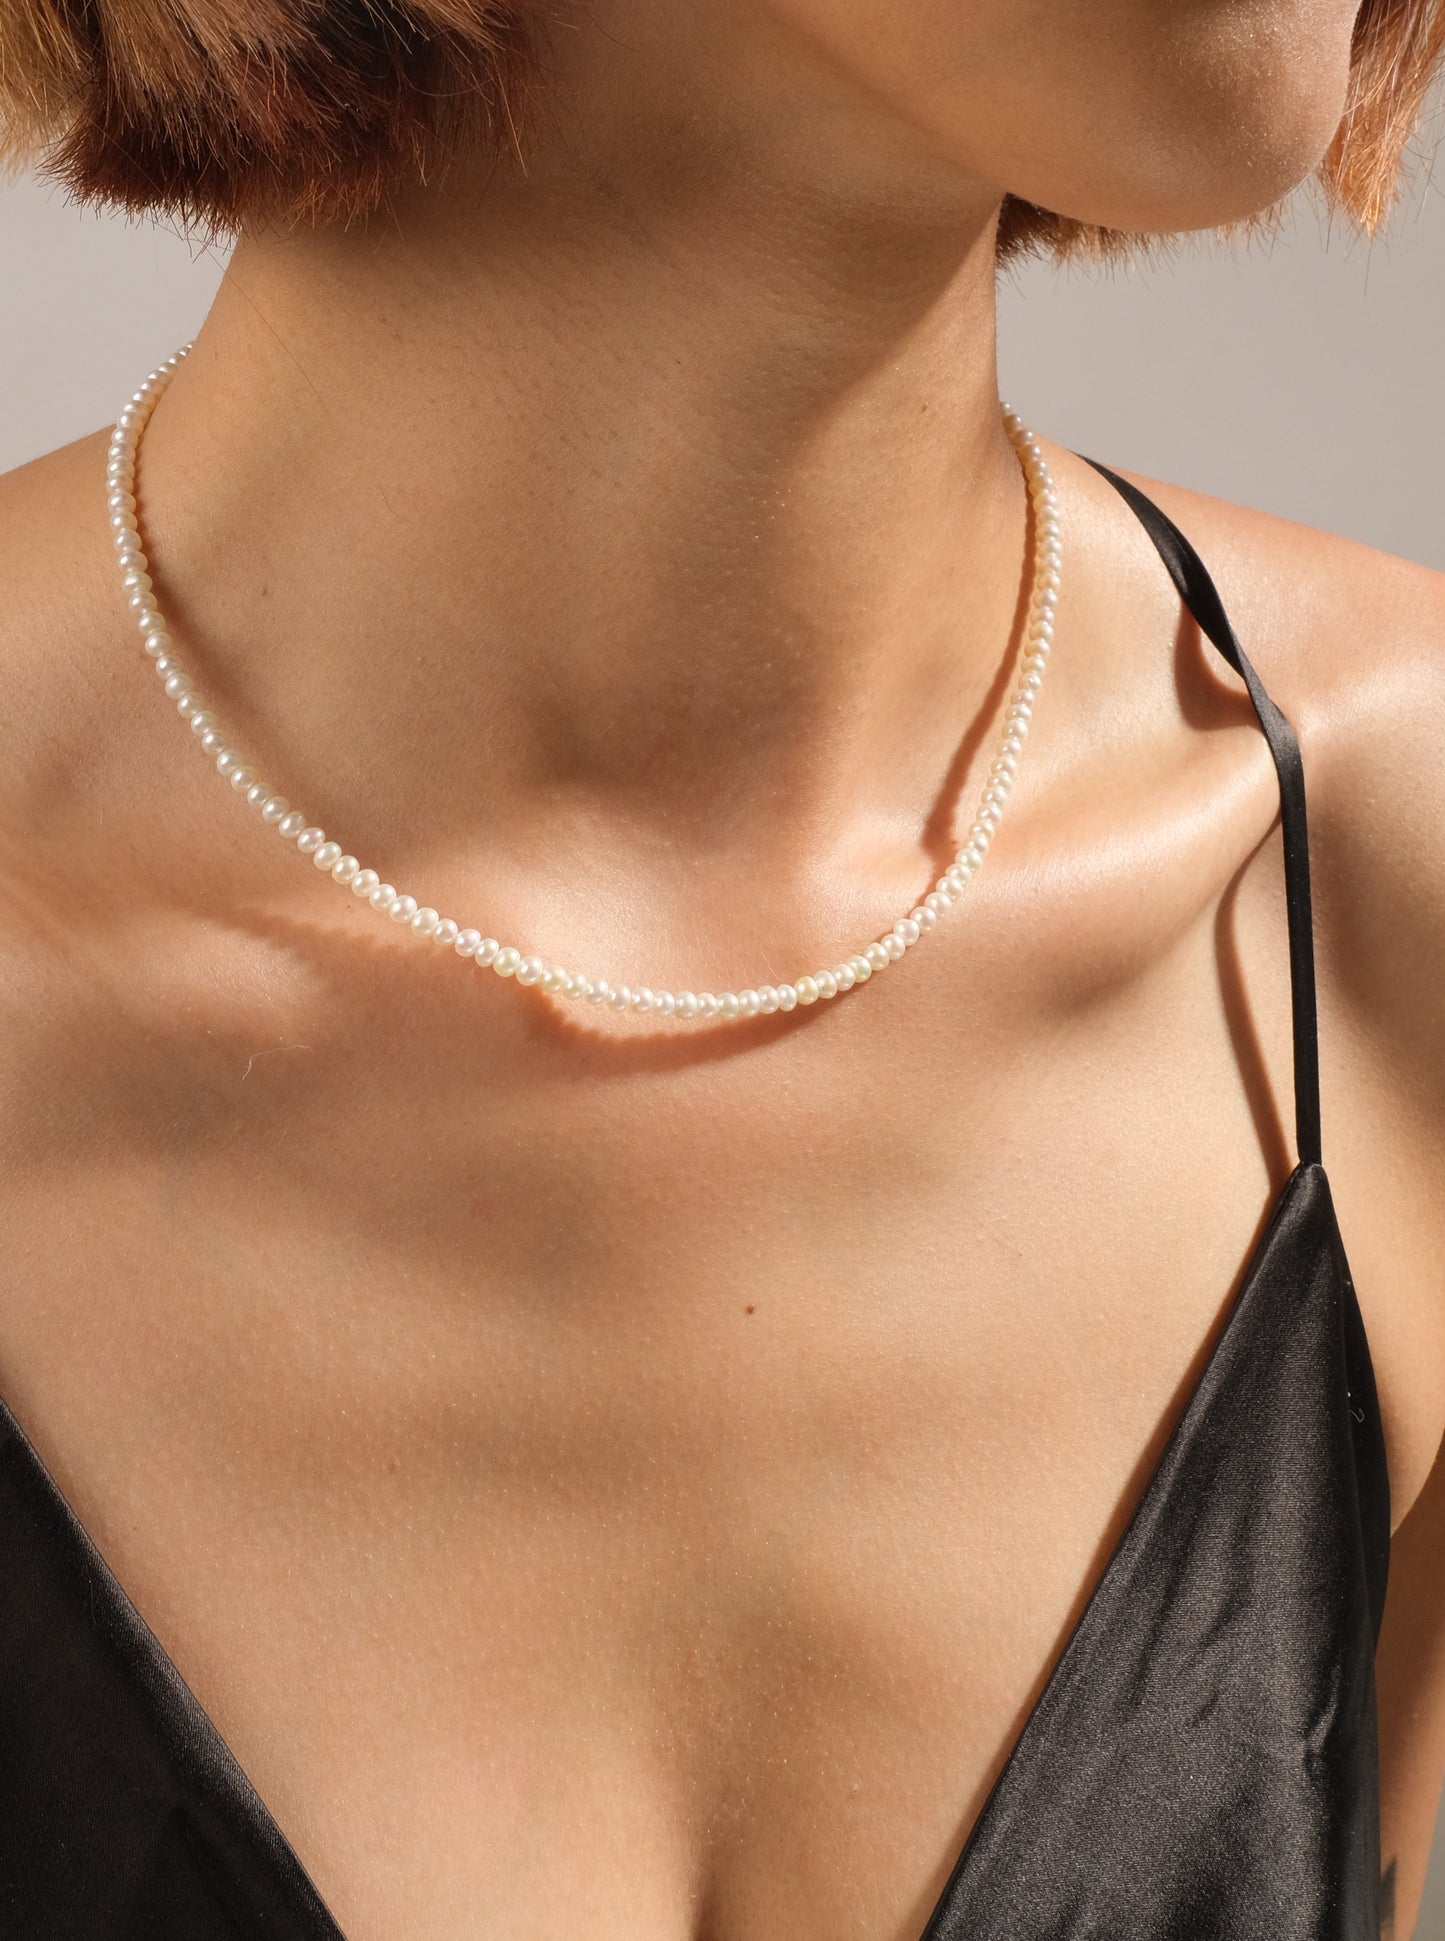 Freshwater Pearl Necklace FNS32